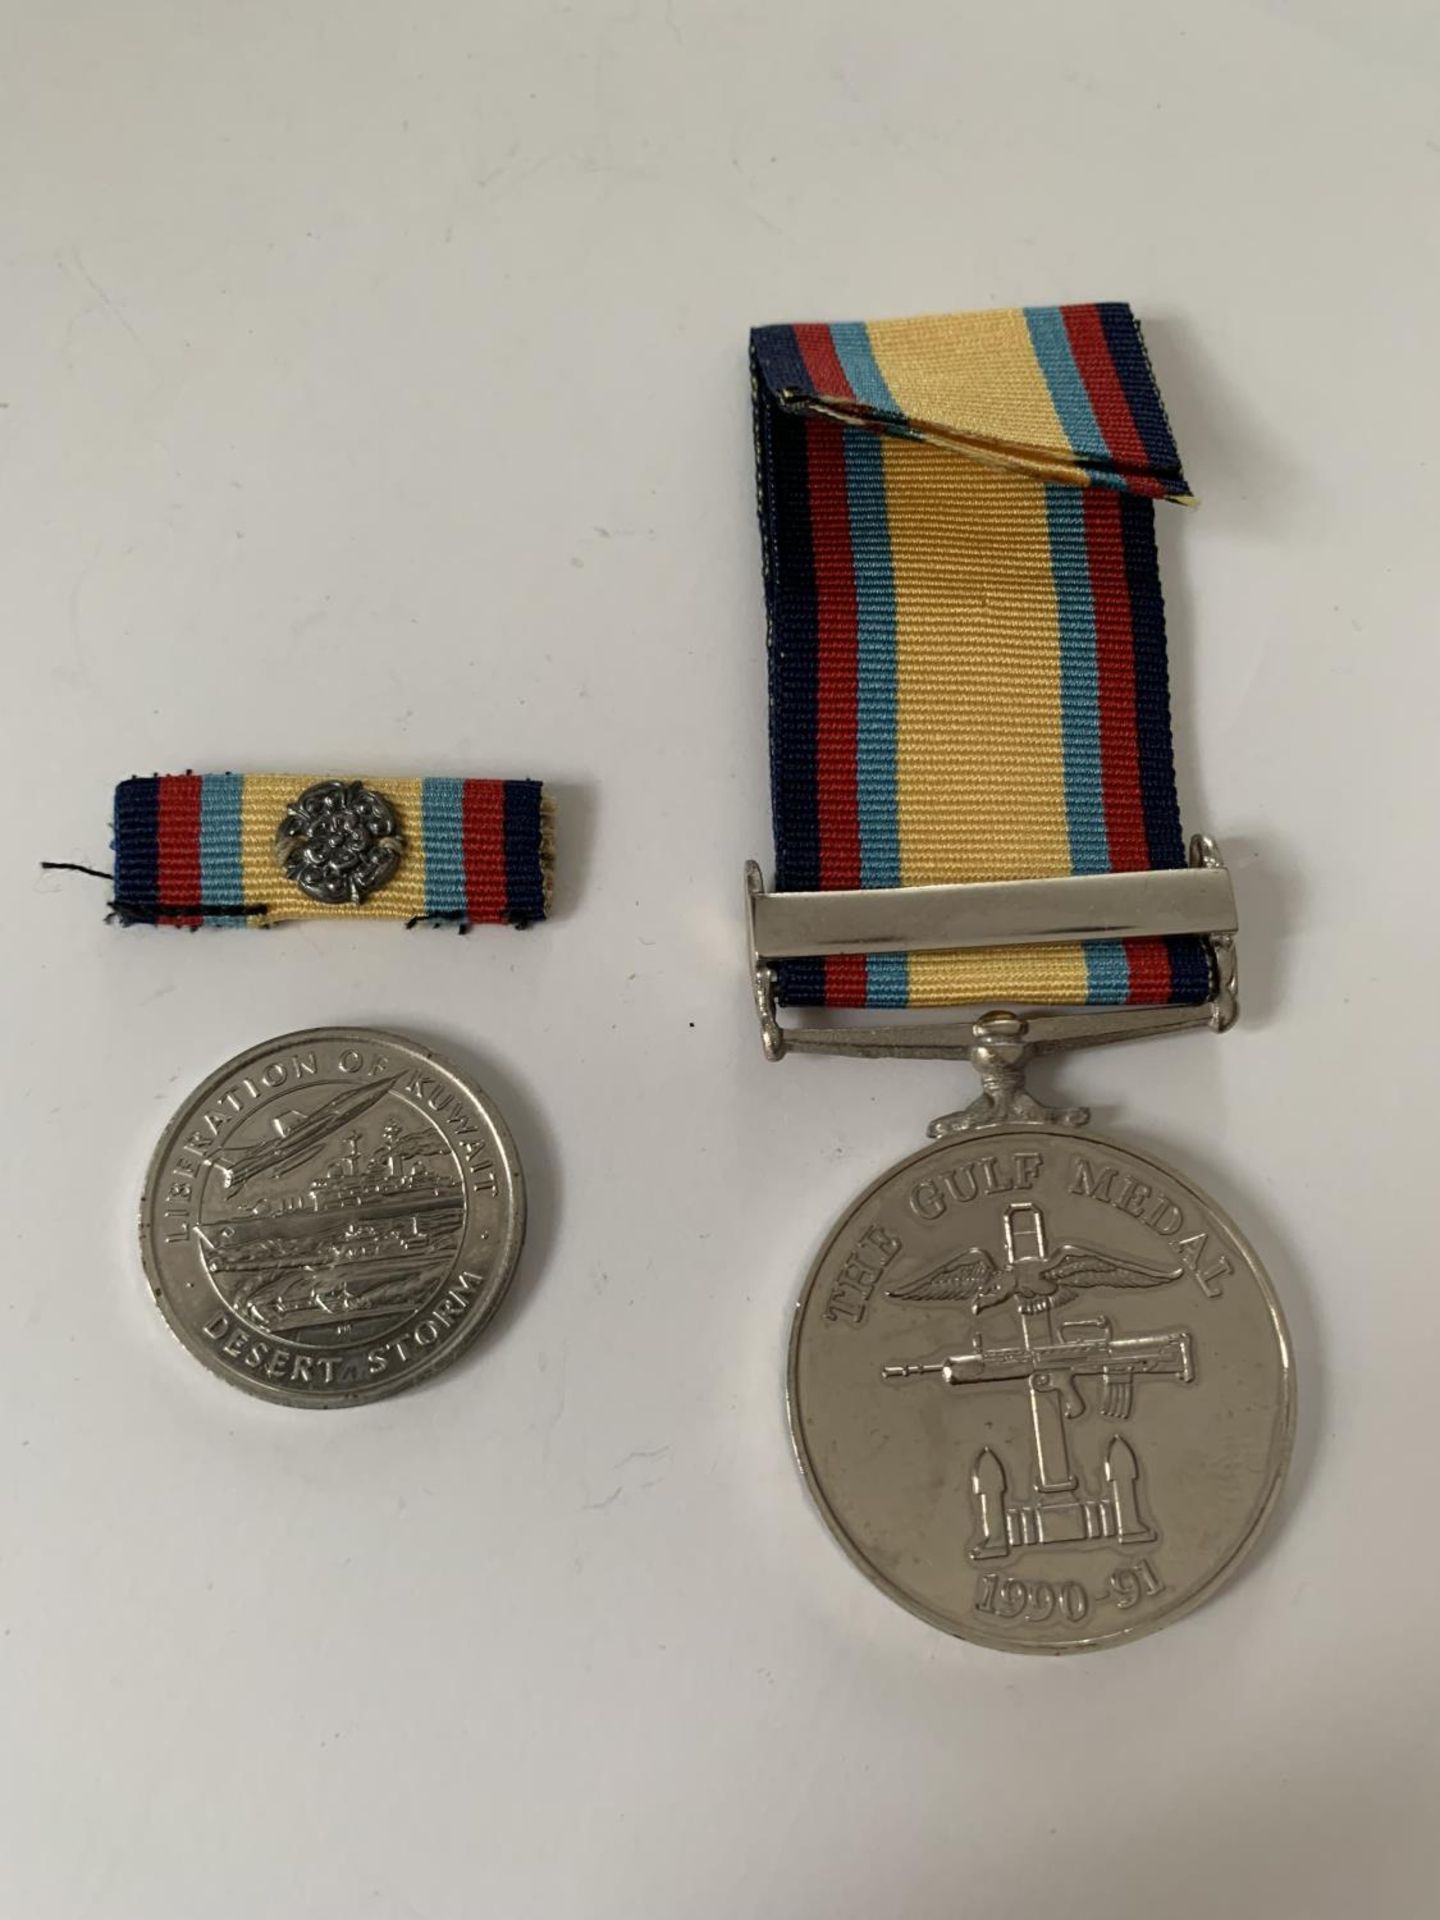 TWO MEDALS TO INCLUDE THE GULF MEDAL 1990-1991 AND A LIBERATION OF KUWAIT DESERT STORM MEDAL 1991